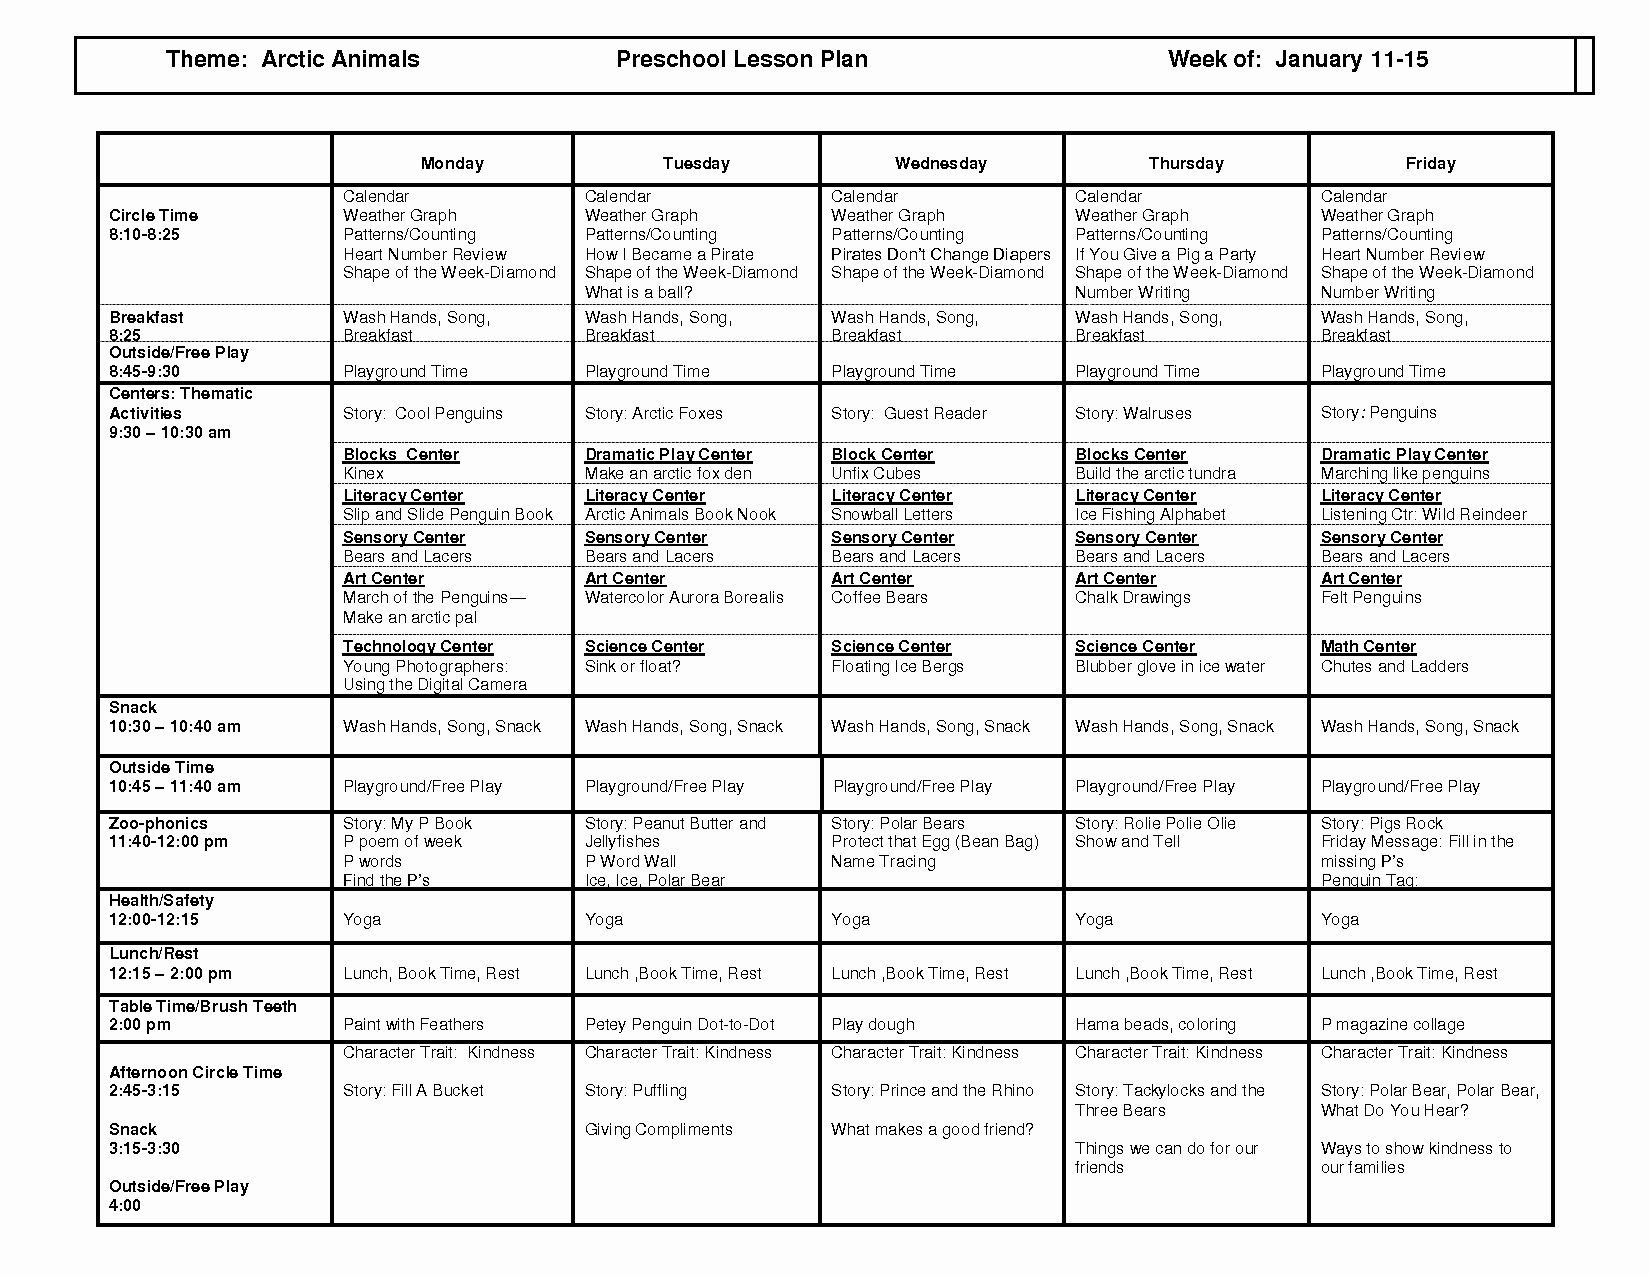 Weekly Lesson Plan for Preschool Best Of Free Weekly Lesson Plan Template and Teacher Resources